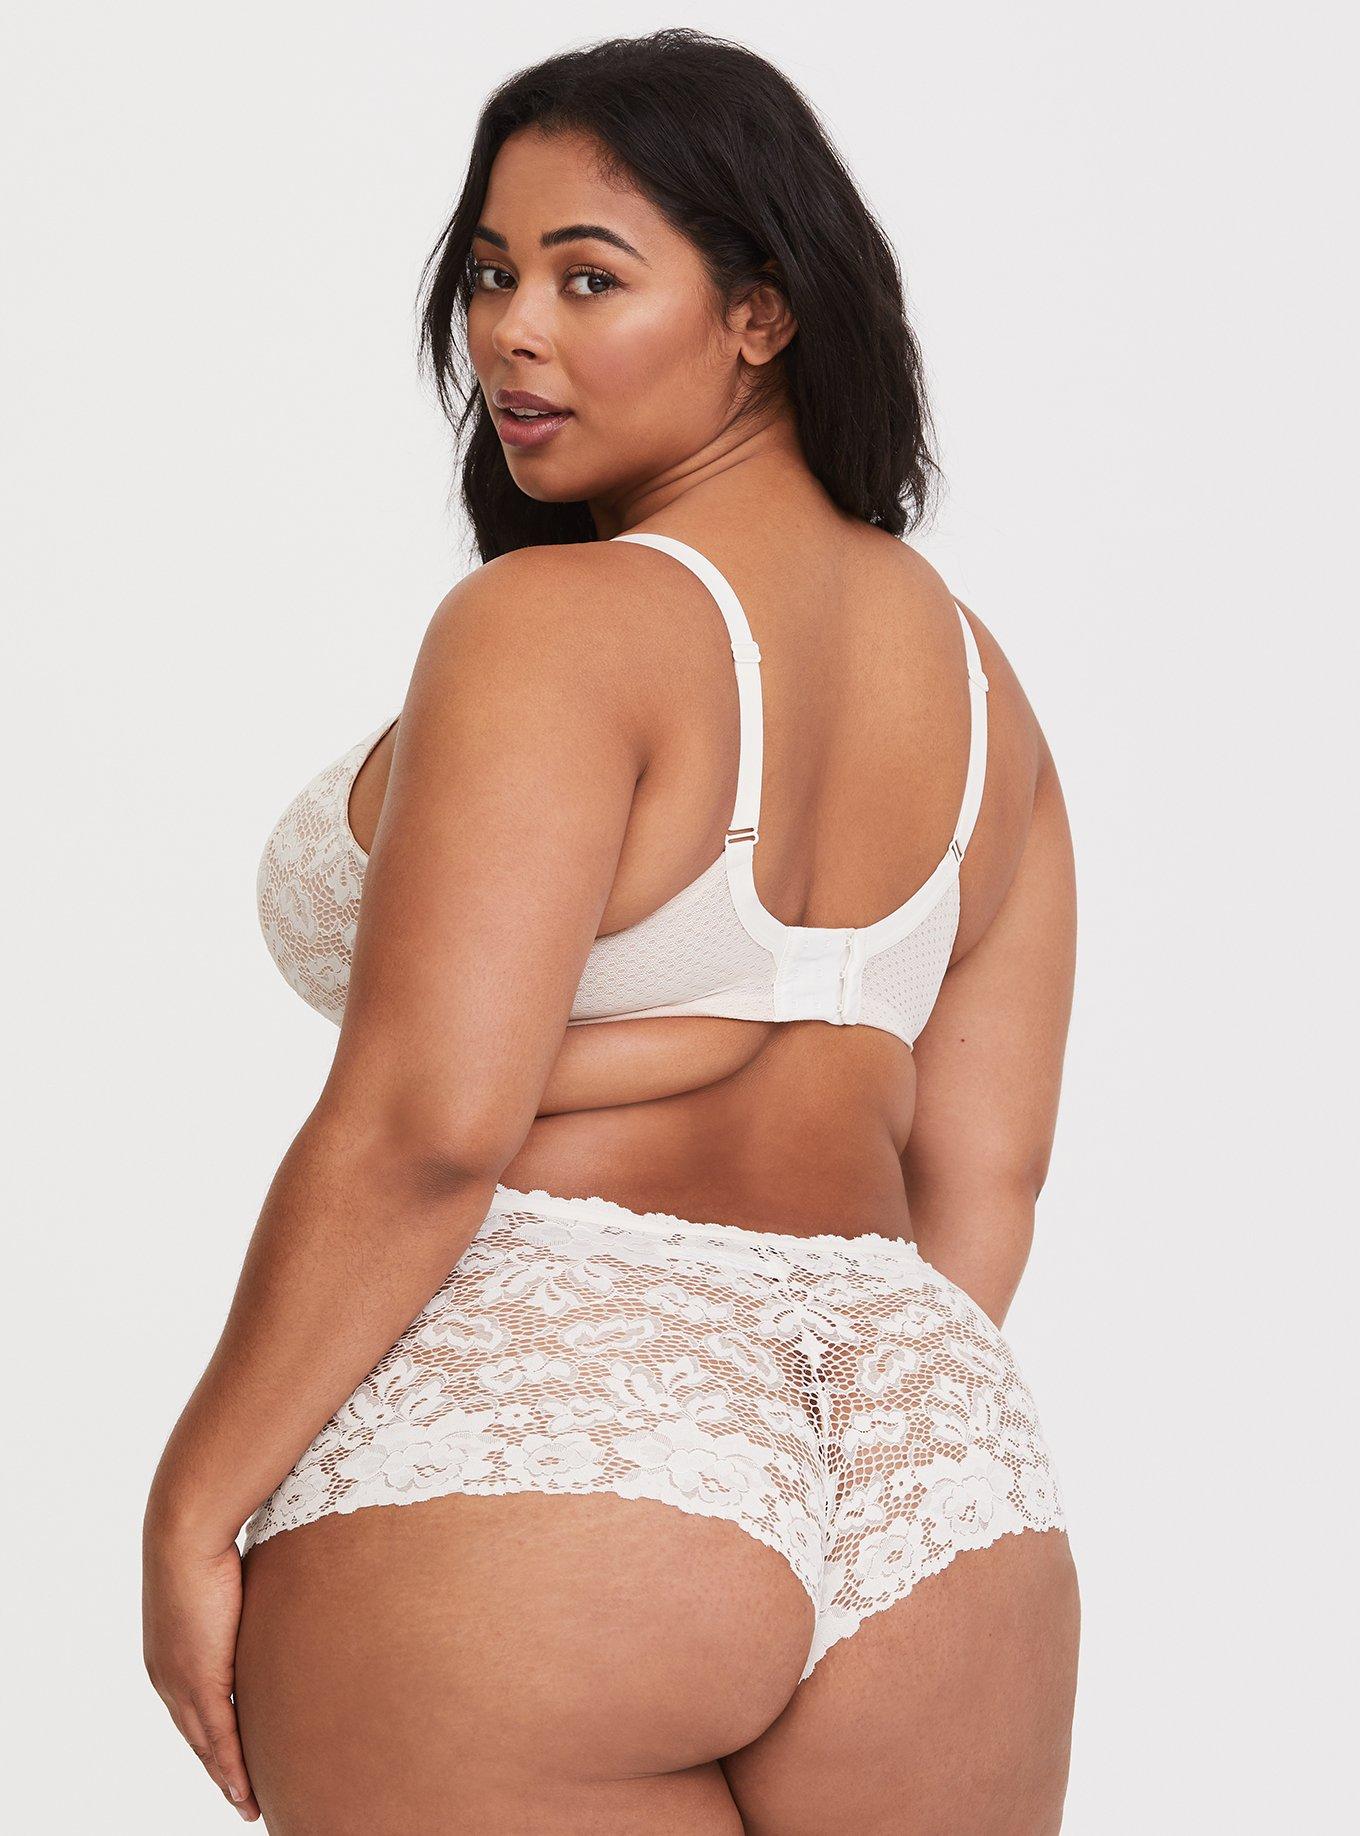 Plus Size - Ivory Lace Cheeky Panty - Torrid